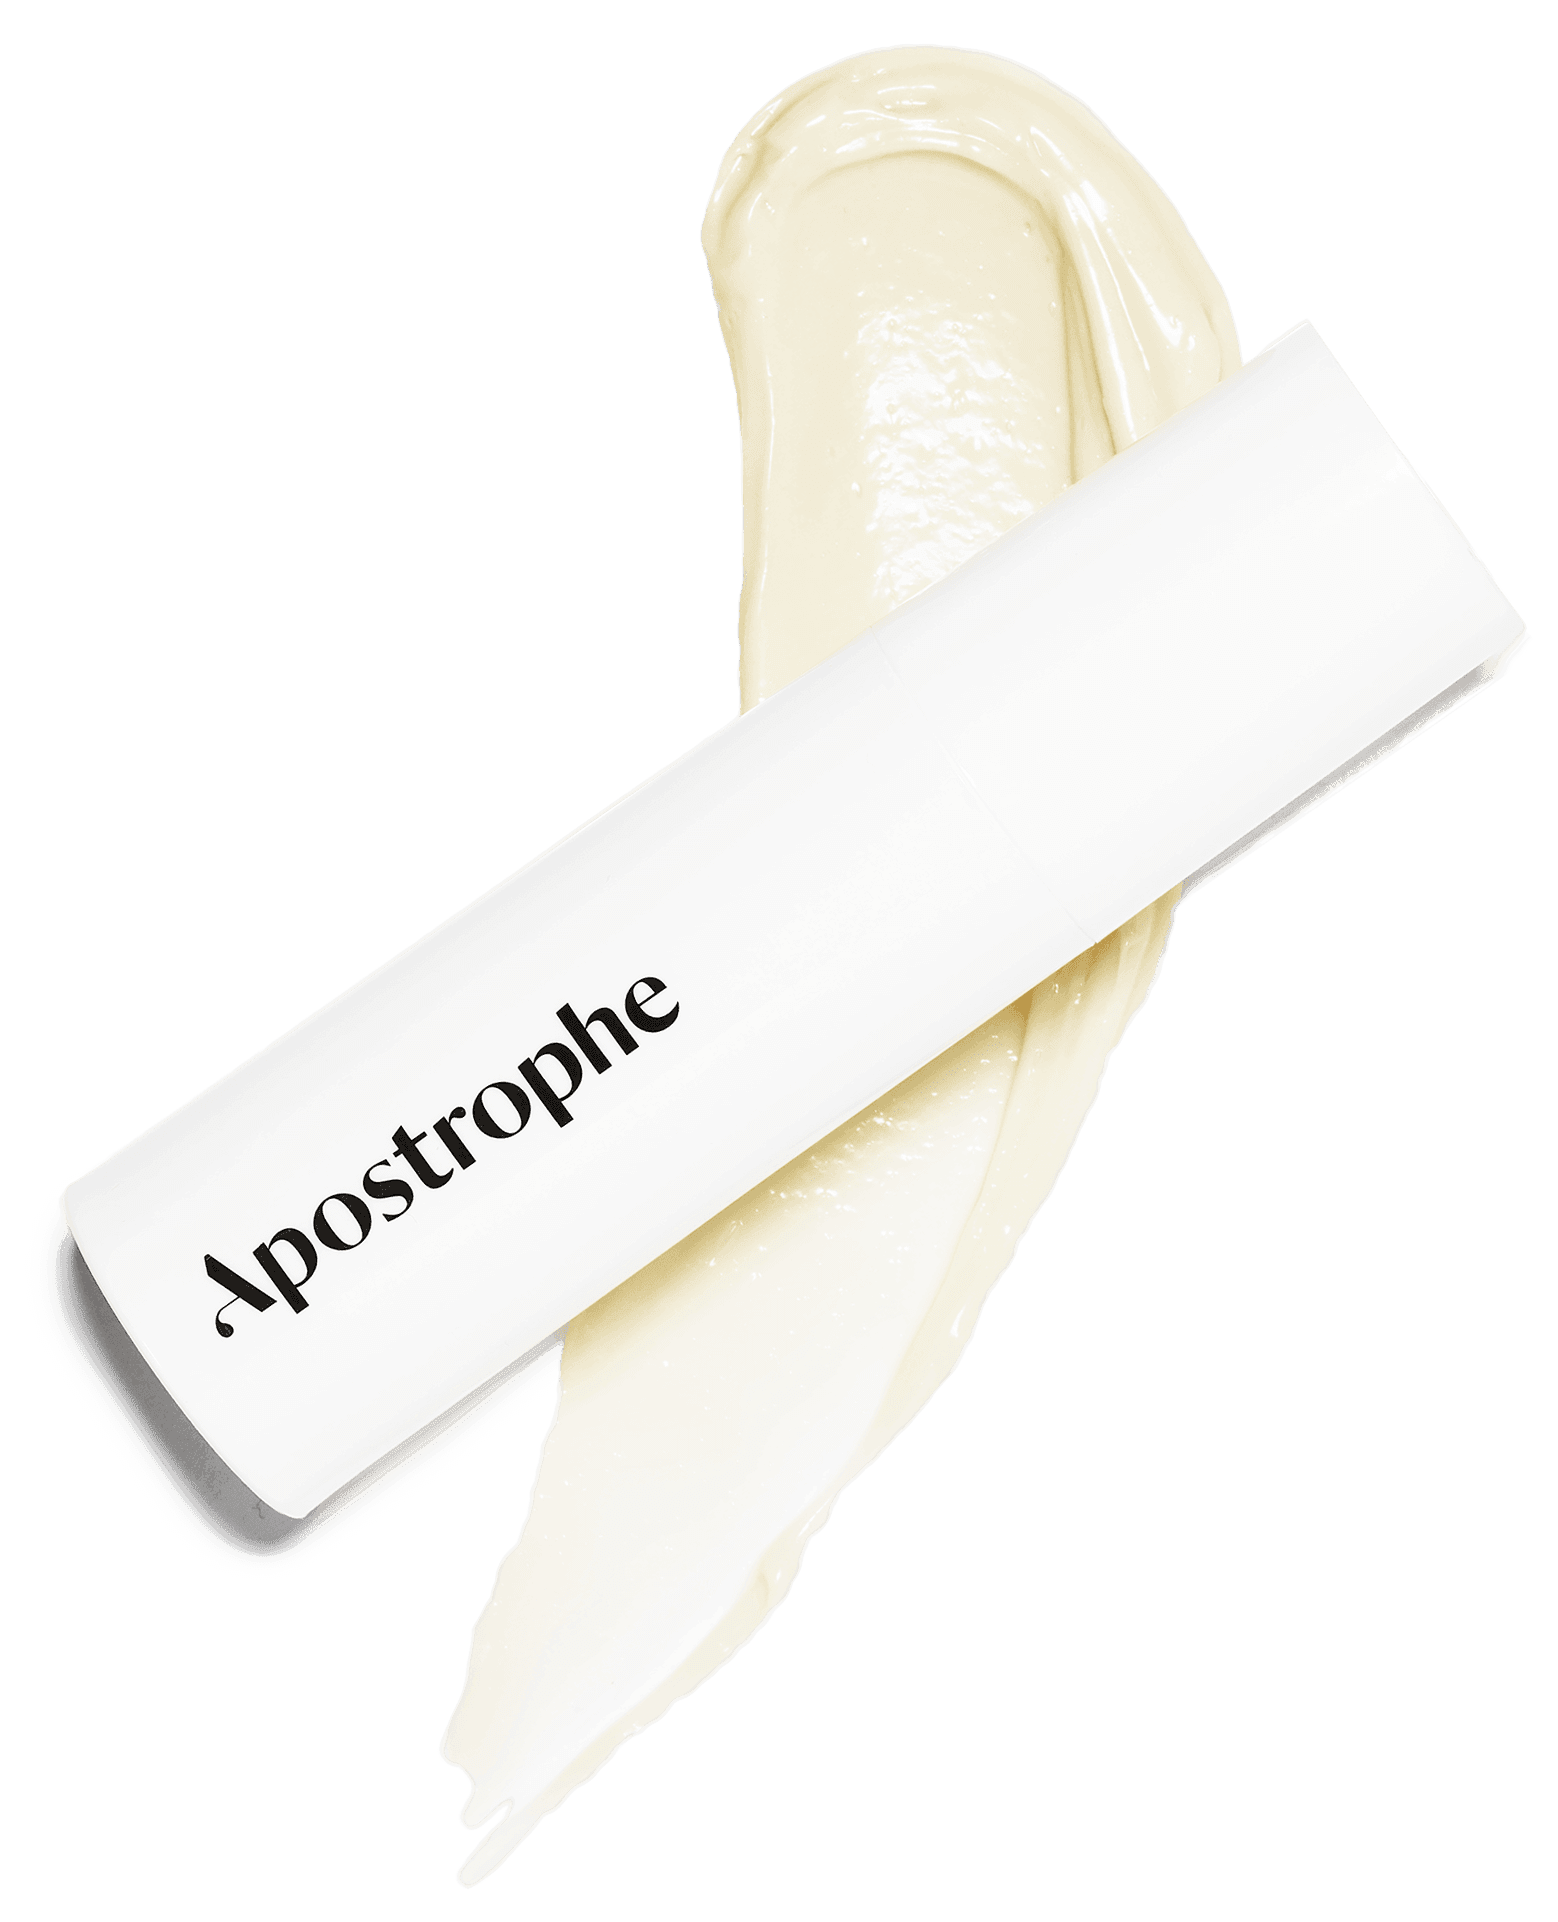 Apostrophe Pharmacy pump bottle on top of cream topical medication smear